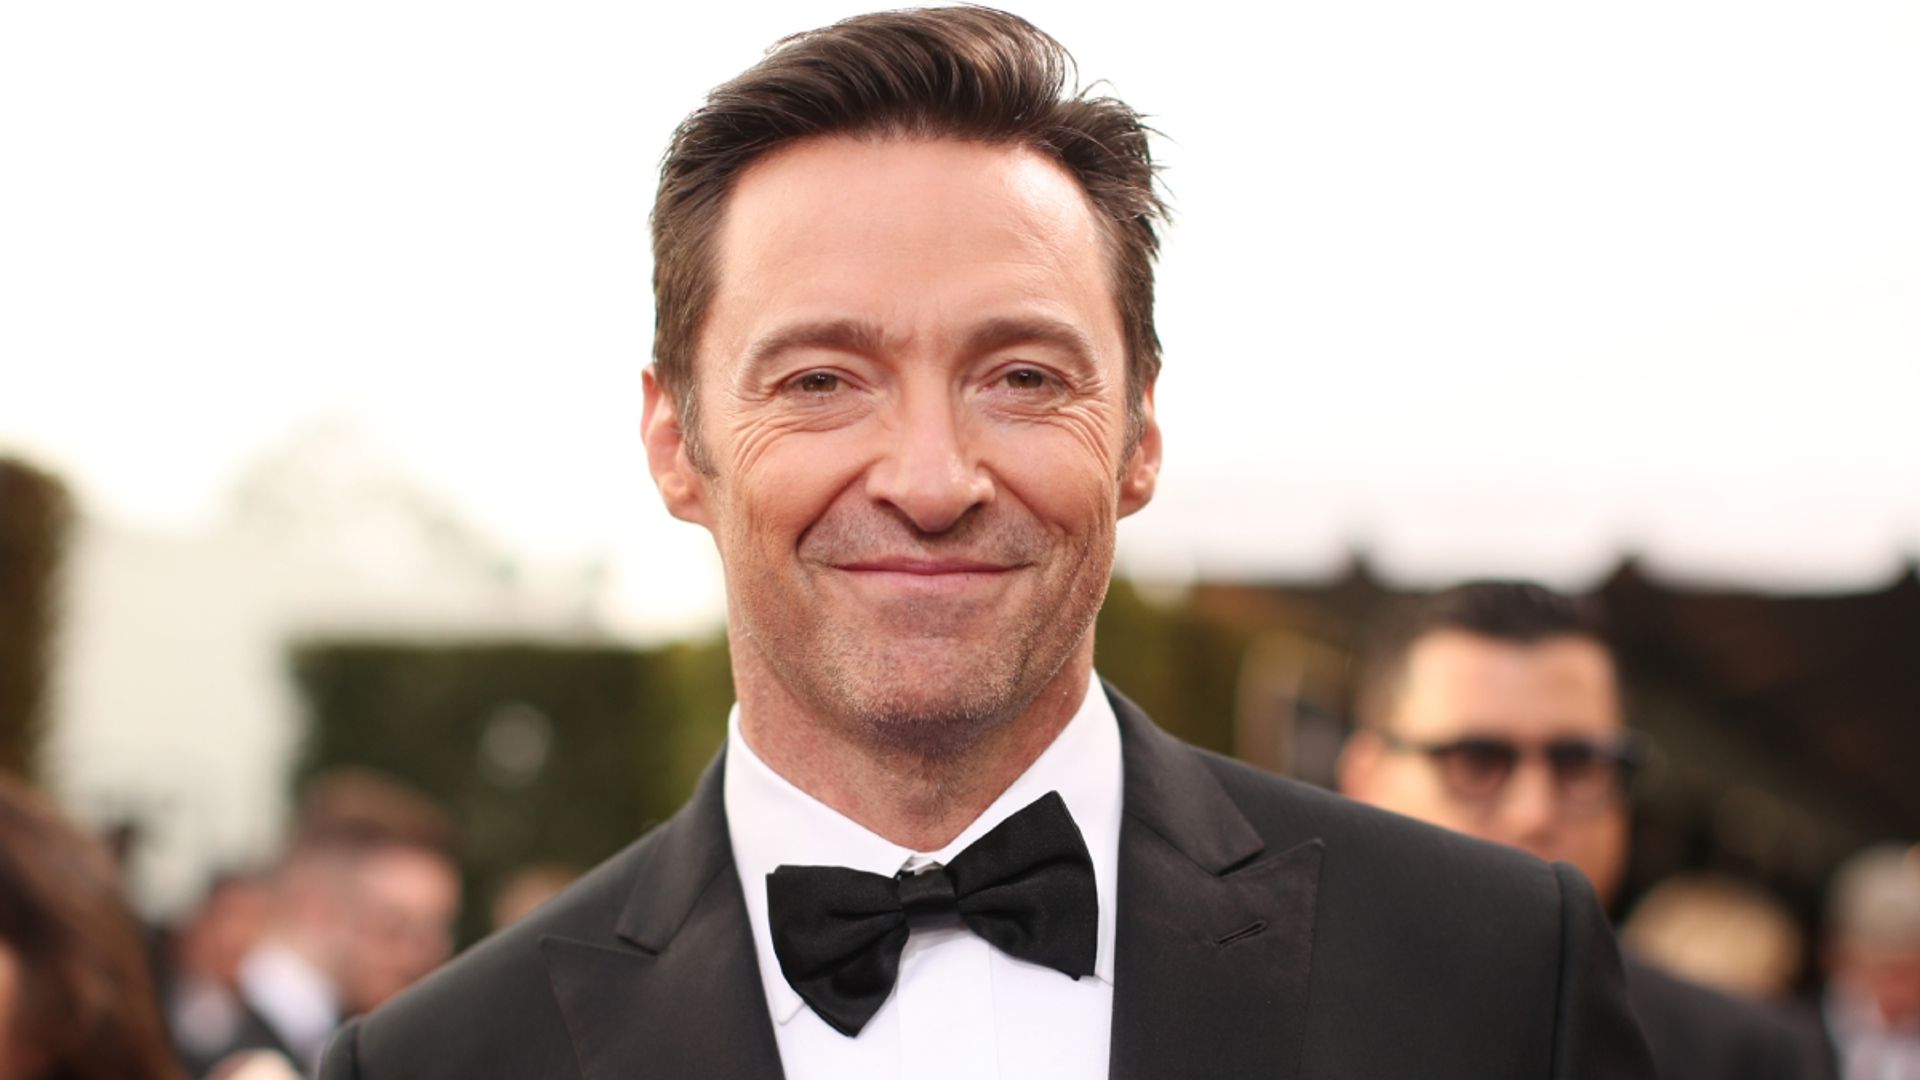 Hugh Jackman shares teaser from special project in extravagant costume